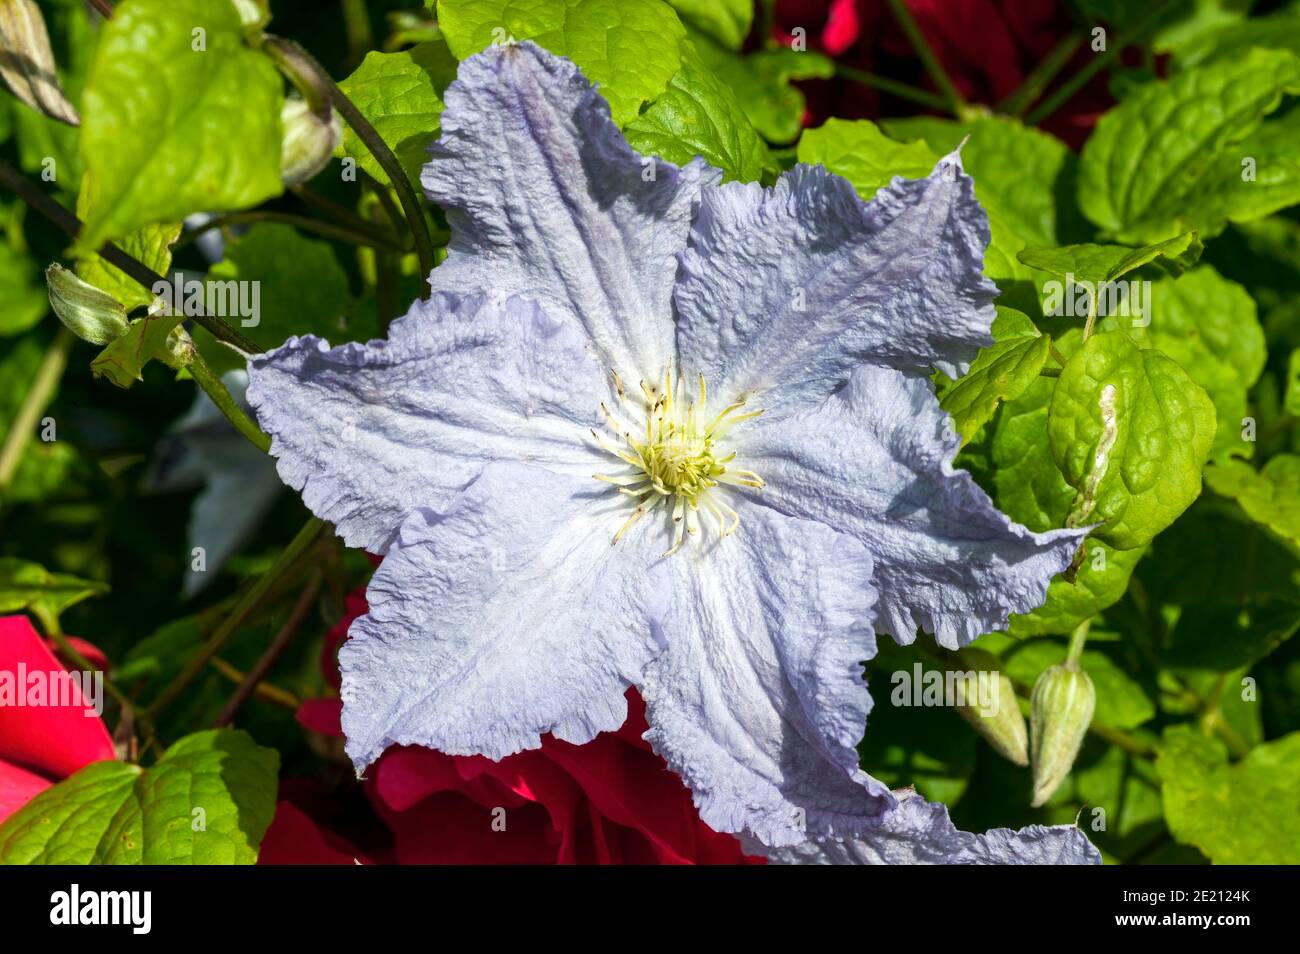 Clematis 'Blekitny Aniol' (Blue Angel) a summer flowering shrub plant with a blue lilac summertime flower which open from June until September, stock Stock Photo